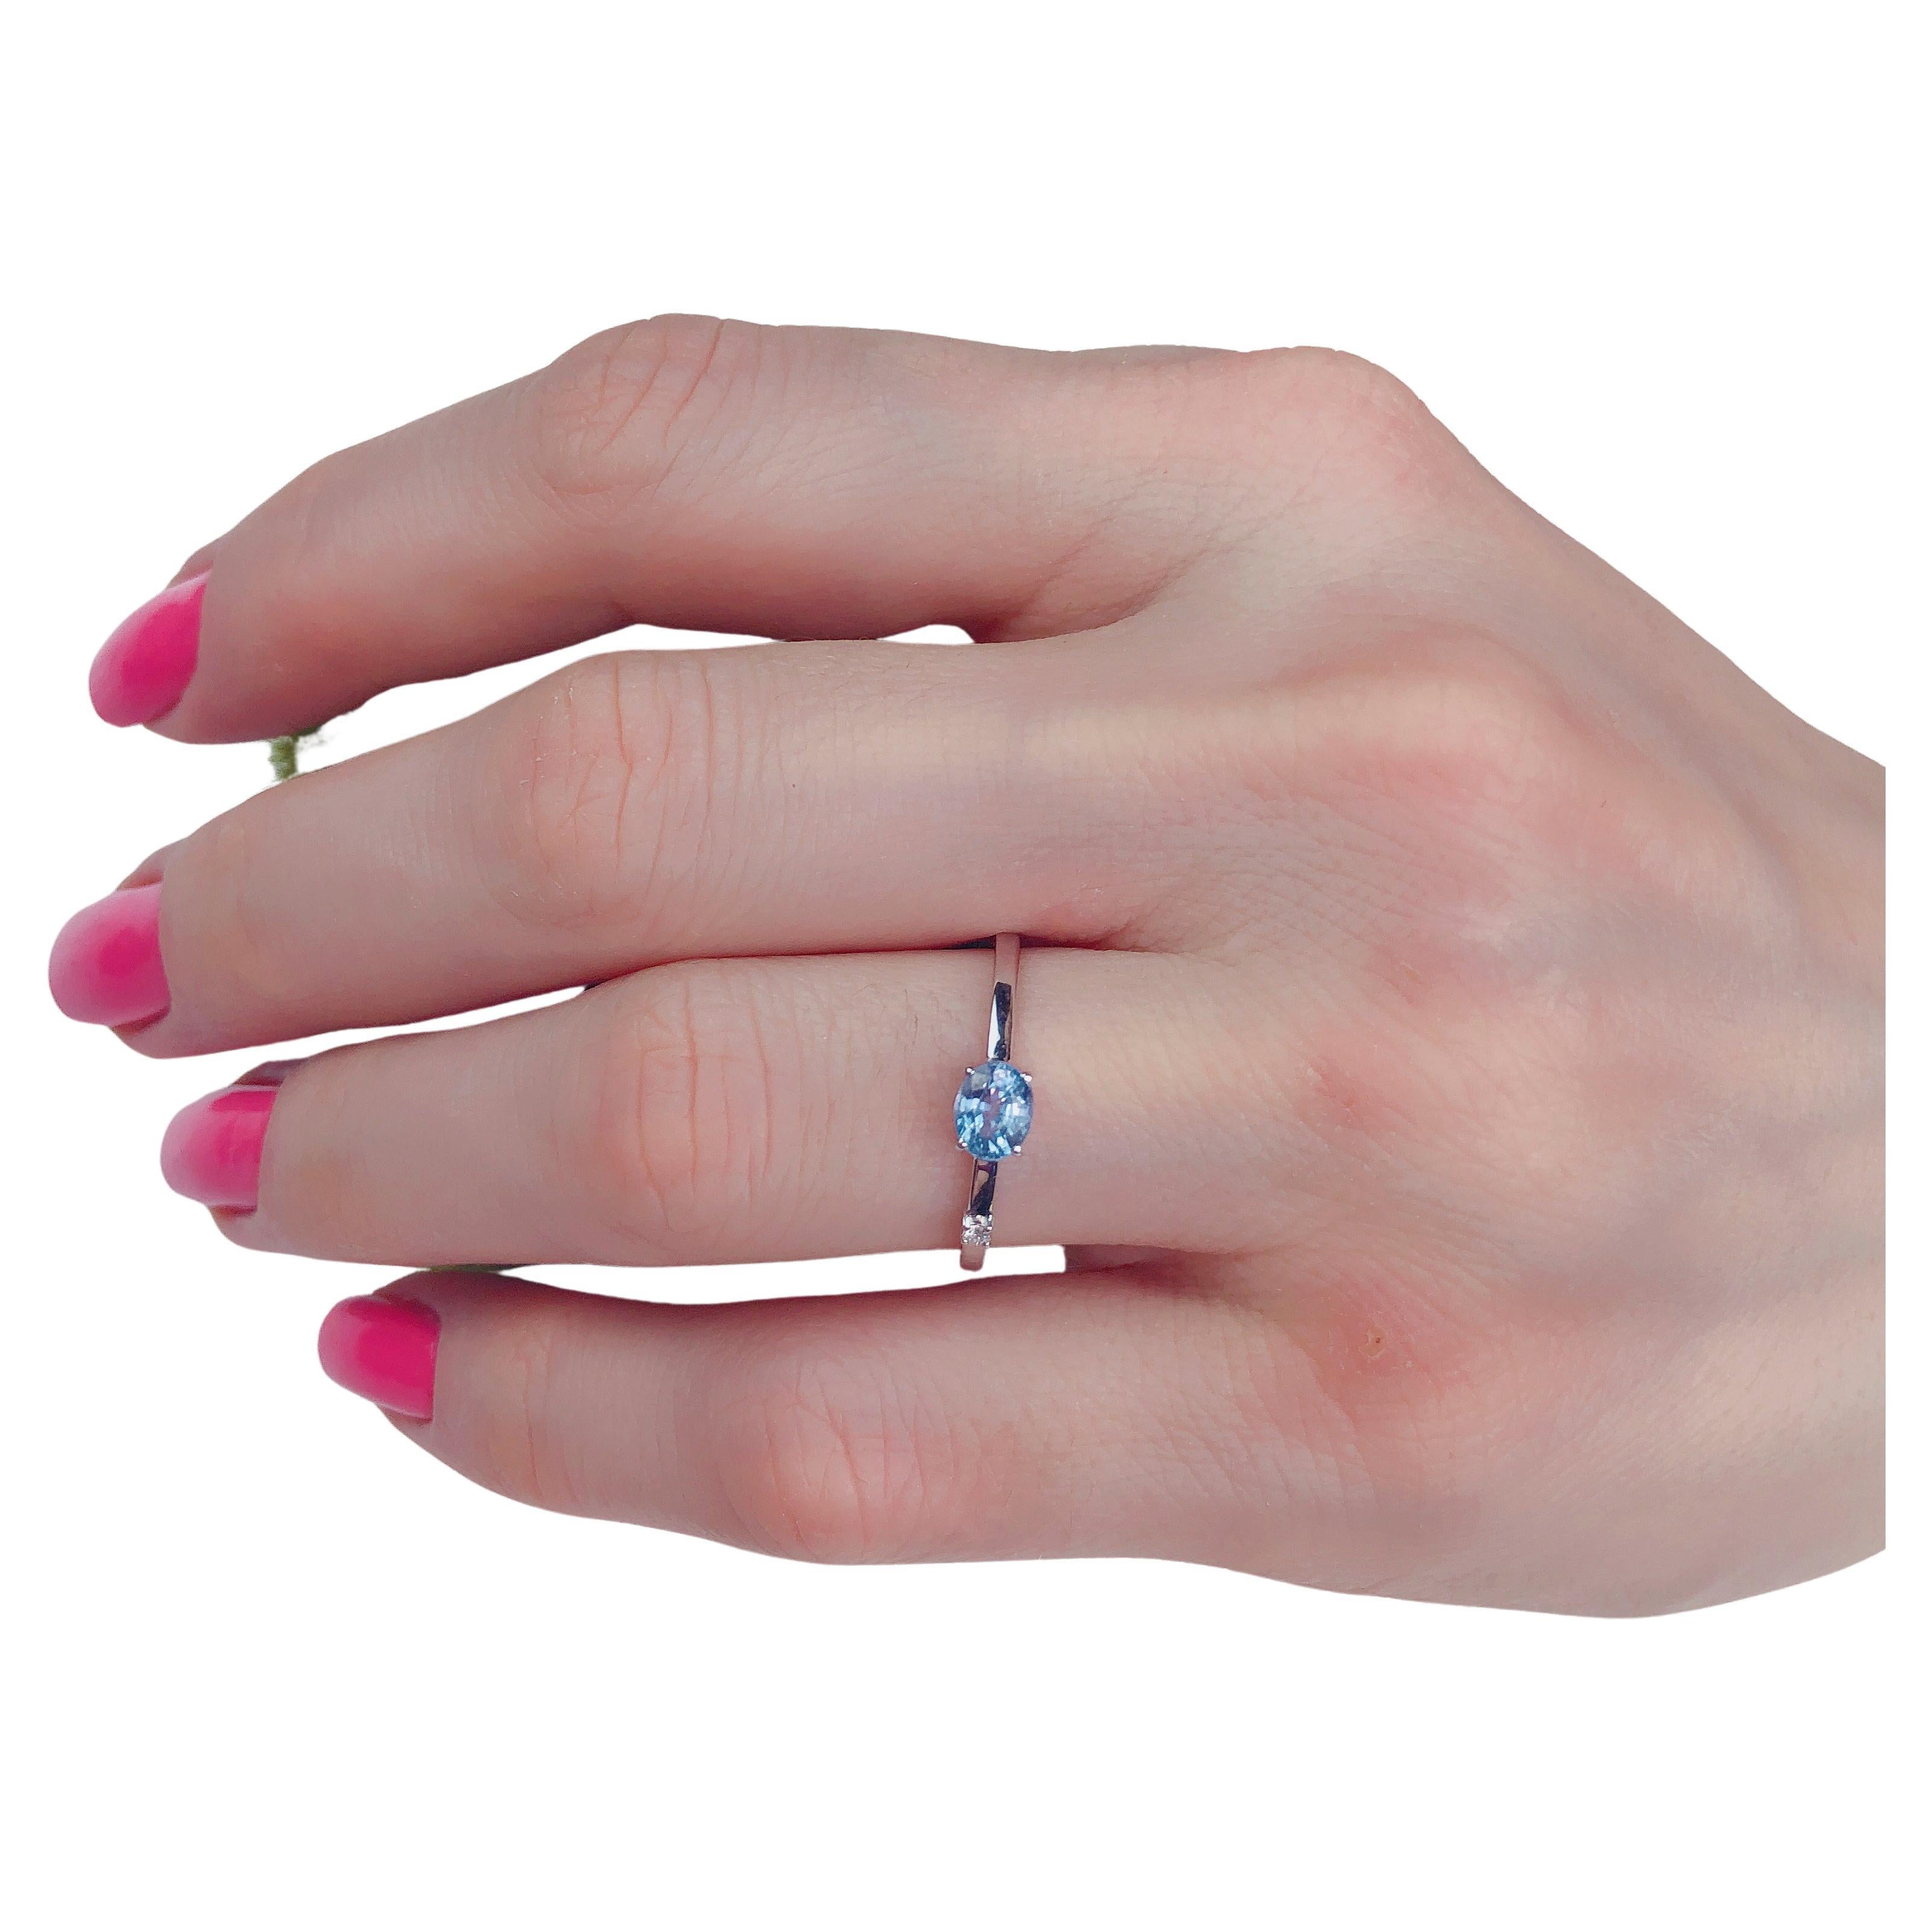 Blue sapphire stackable ring. 